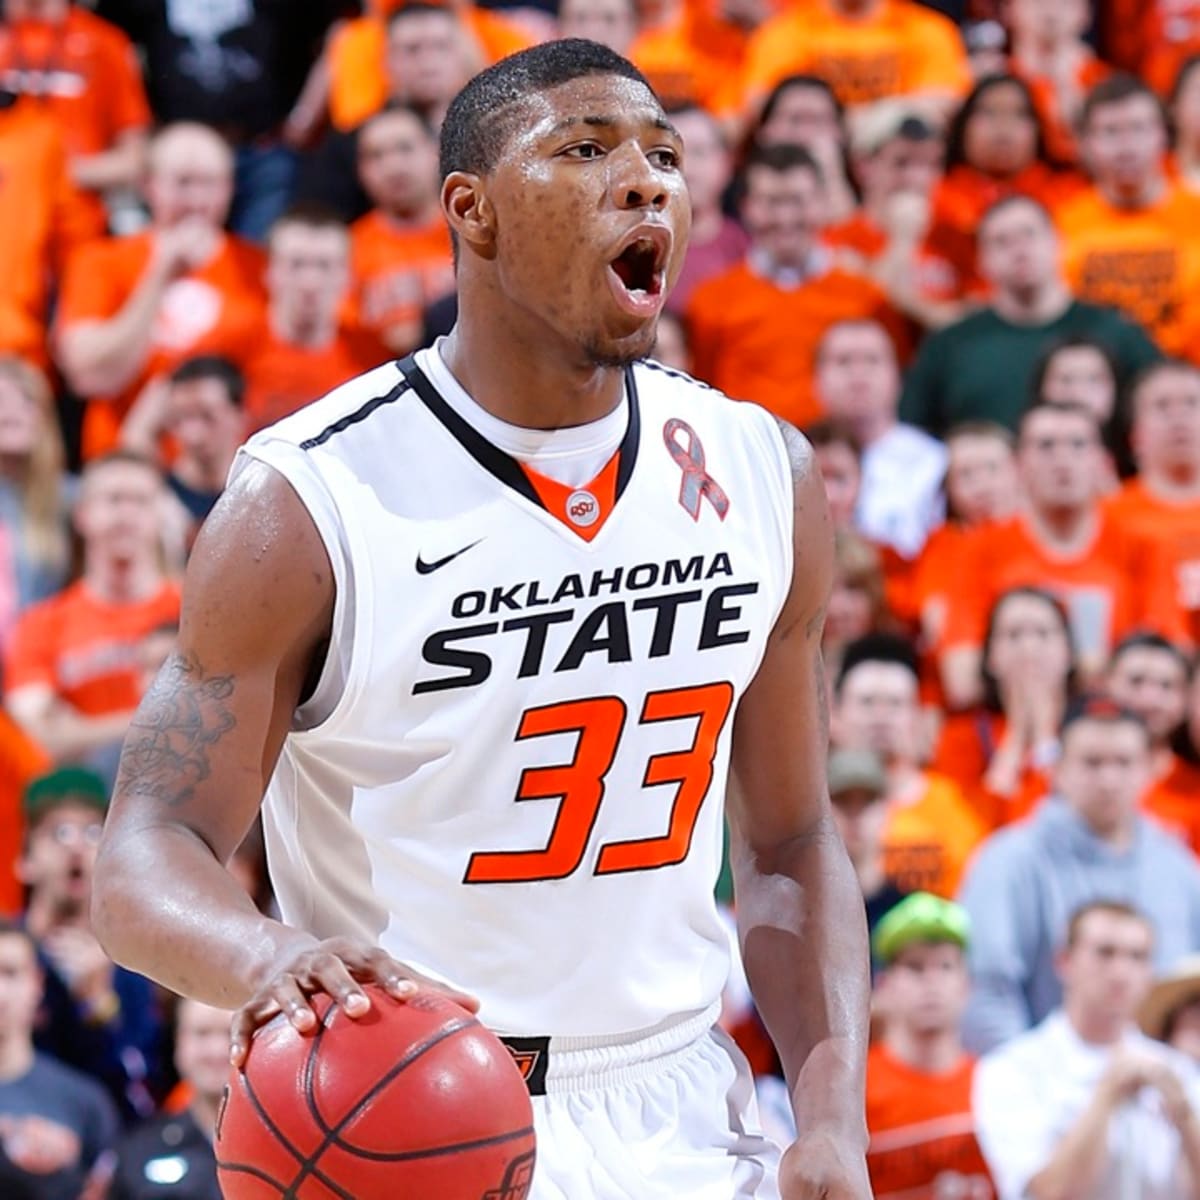 Where Did Marcus Smart Play College Basketball?